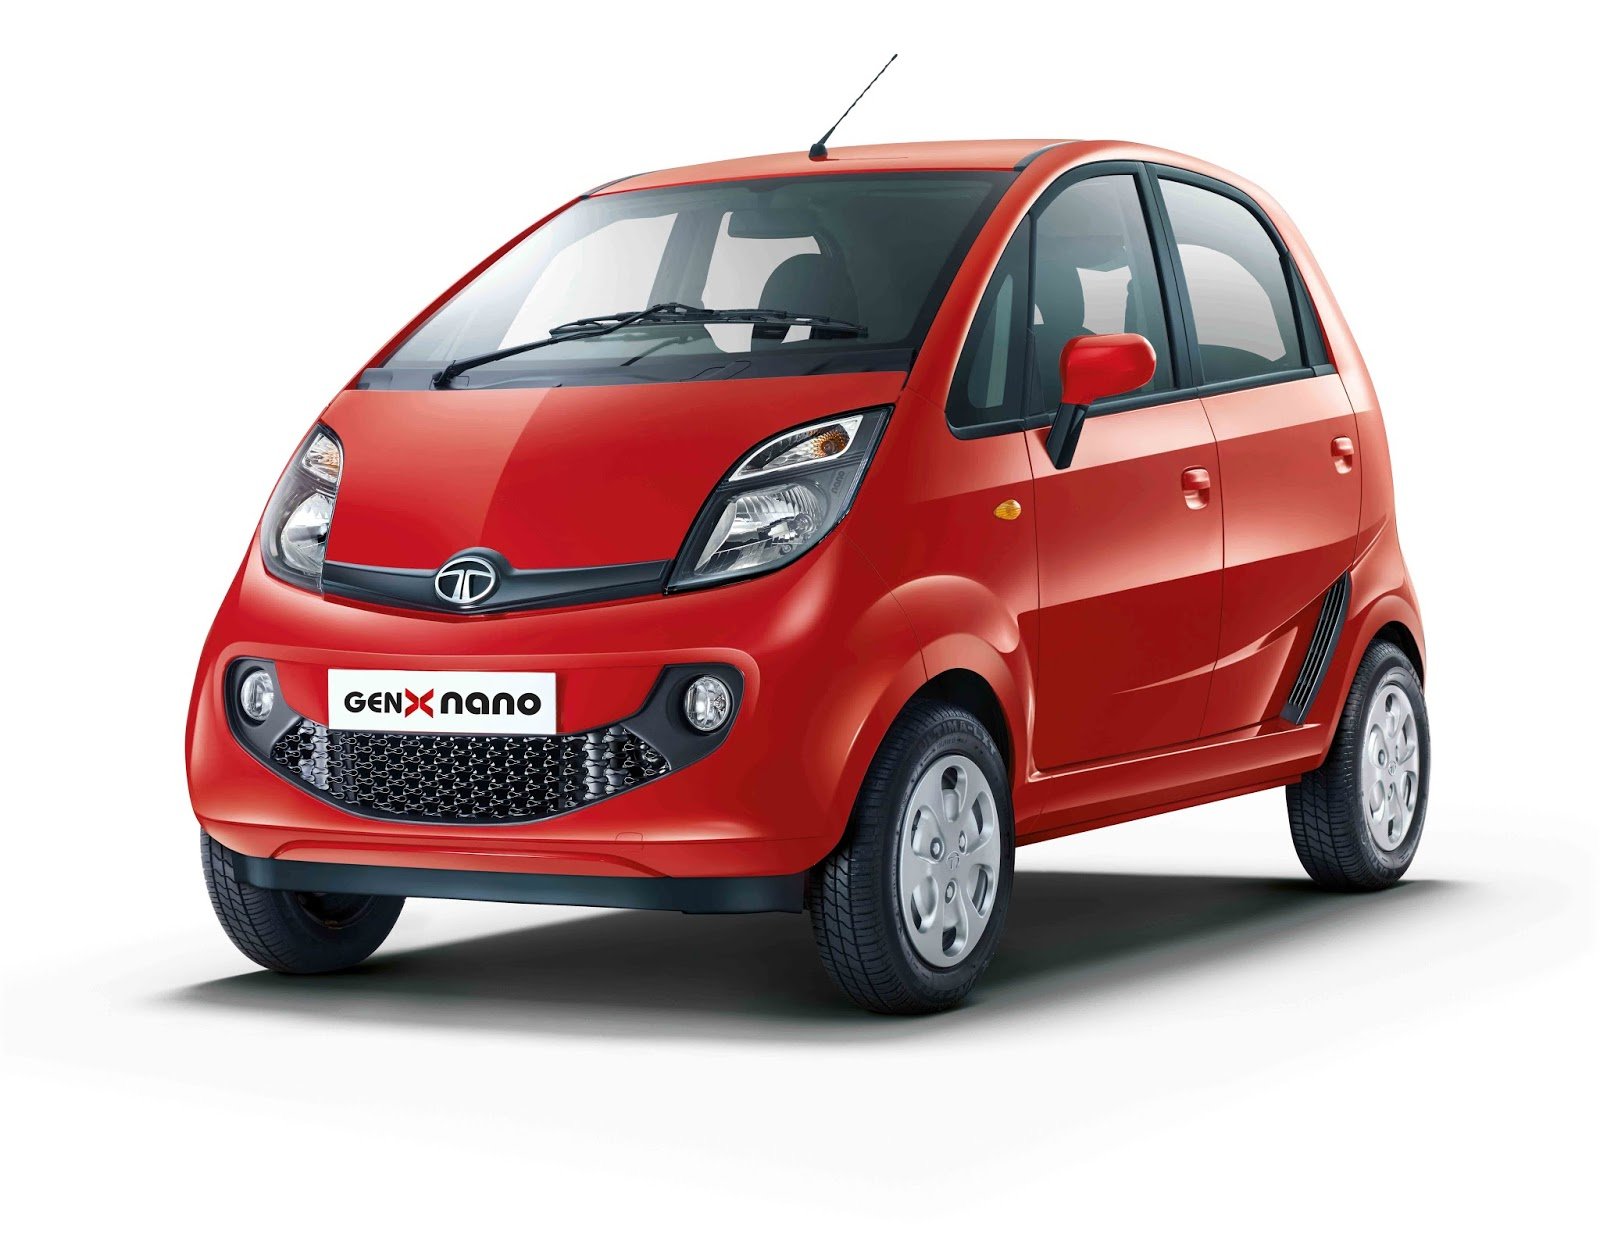 TOP TWO CHEAPEST CARS IN THE WORLD 2015